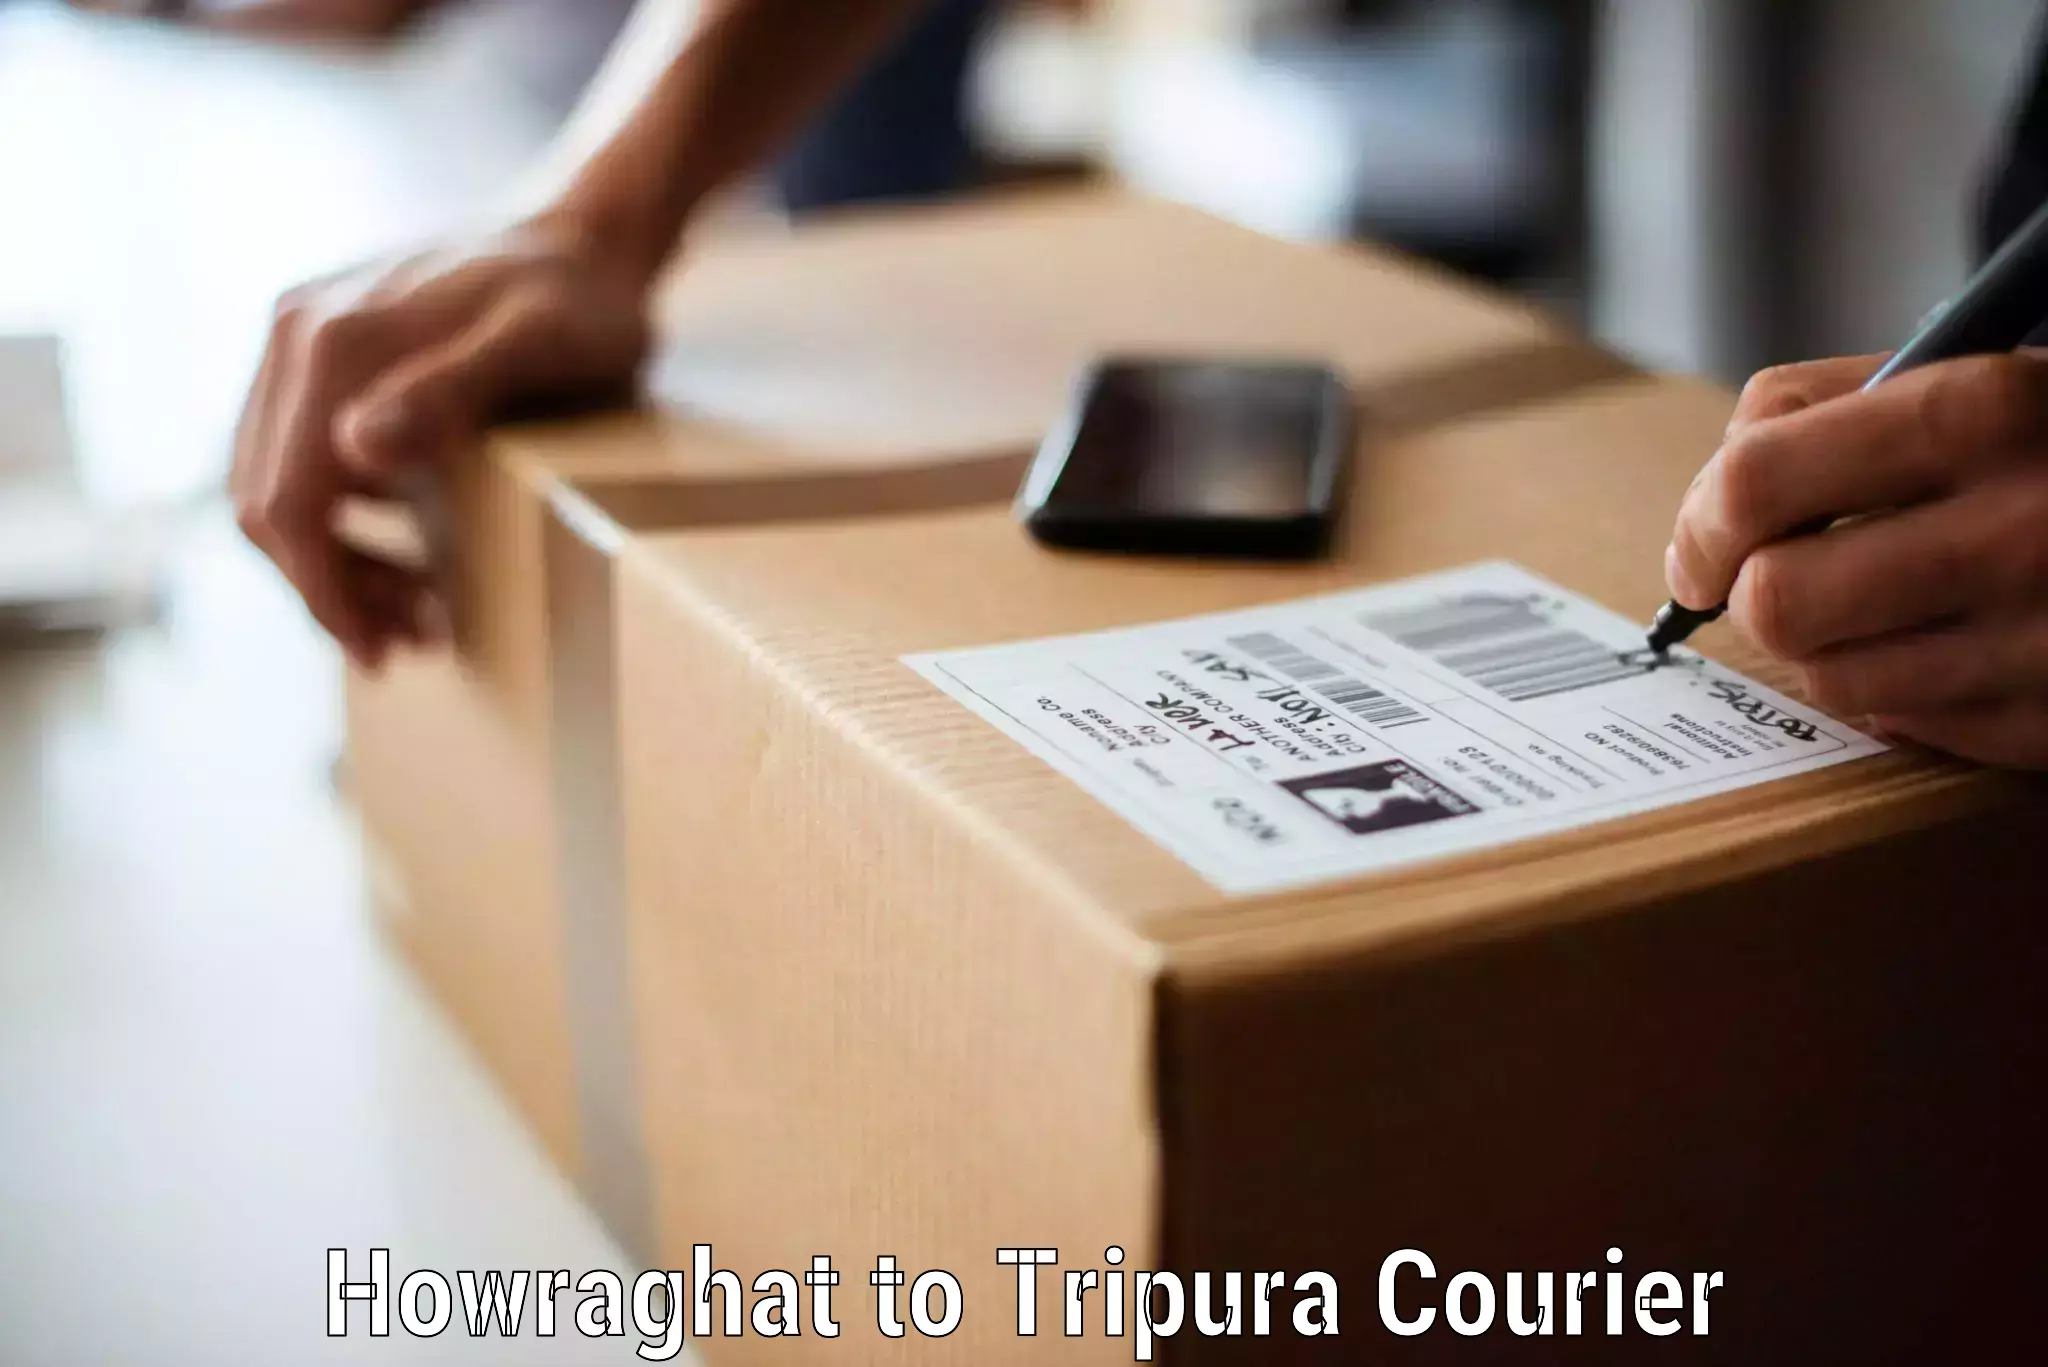 Efficient household movers Howraghat to Udaipur Tripura